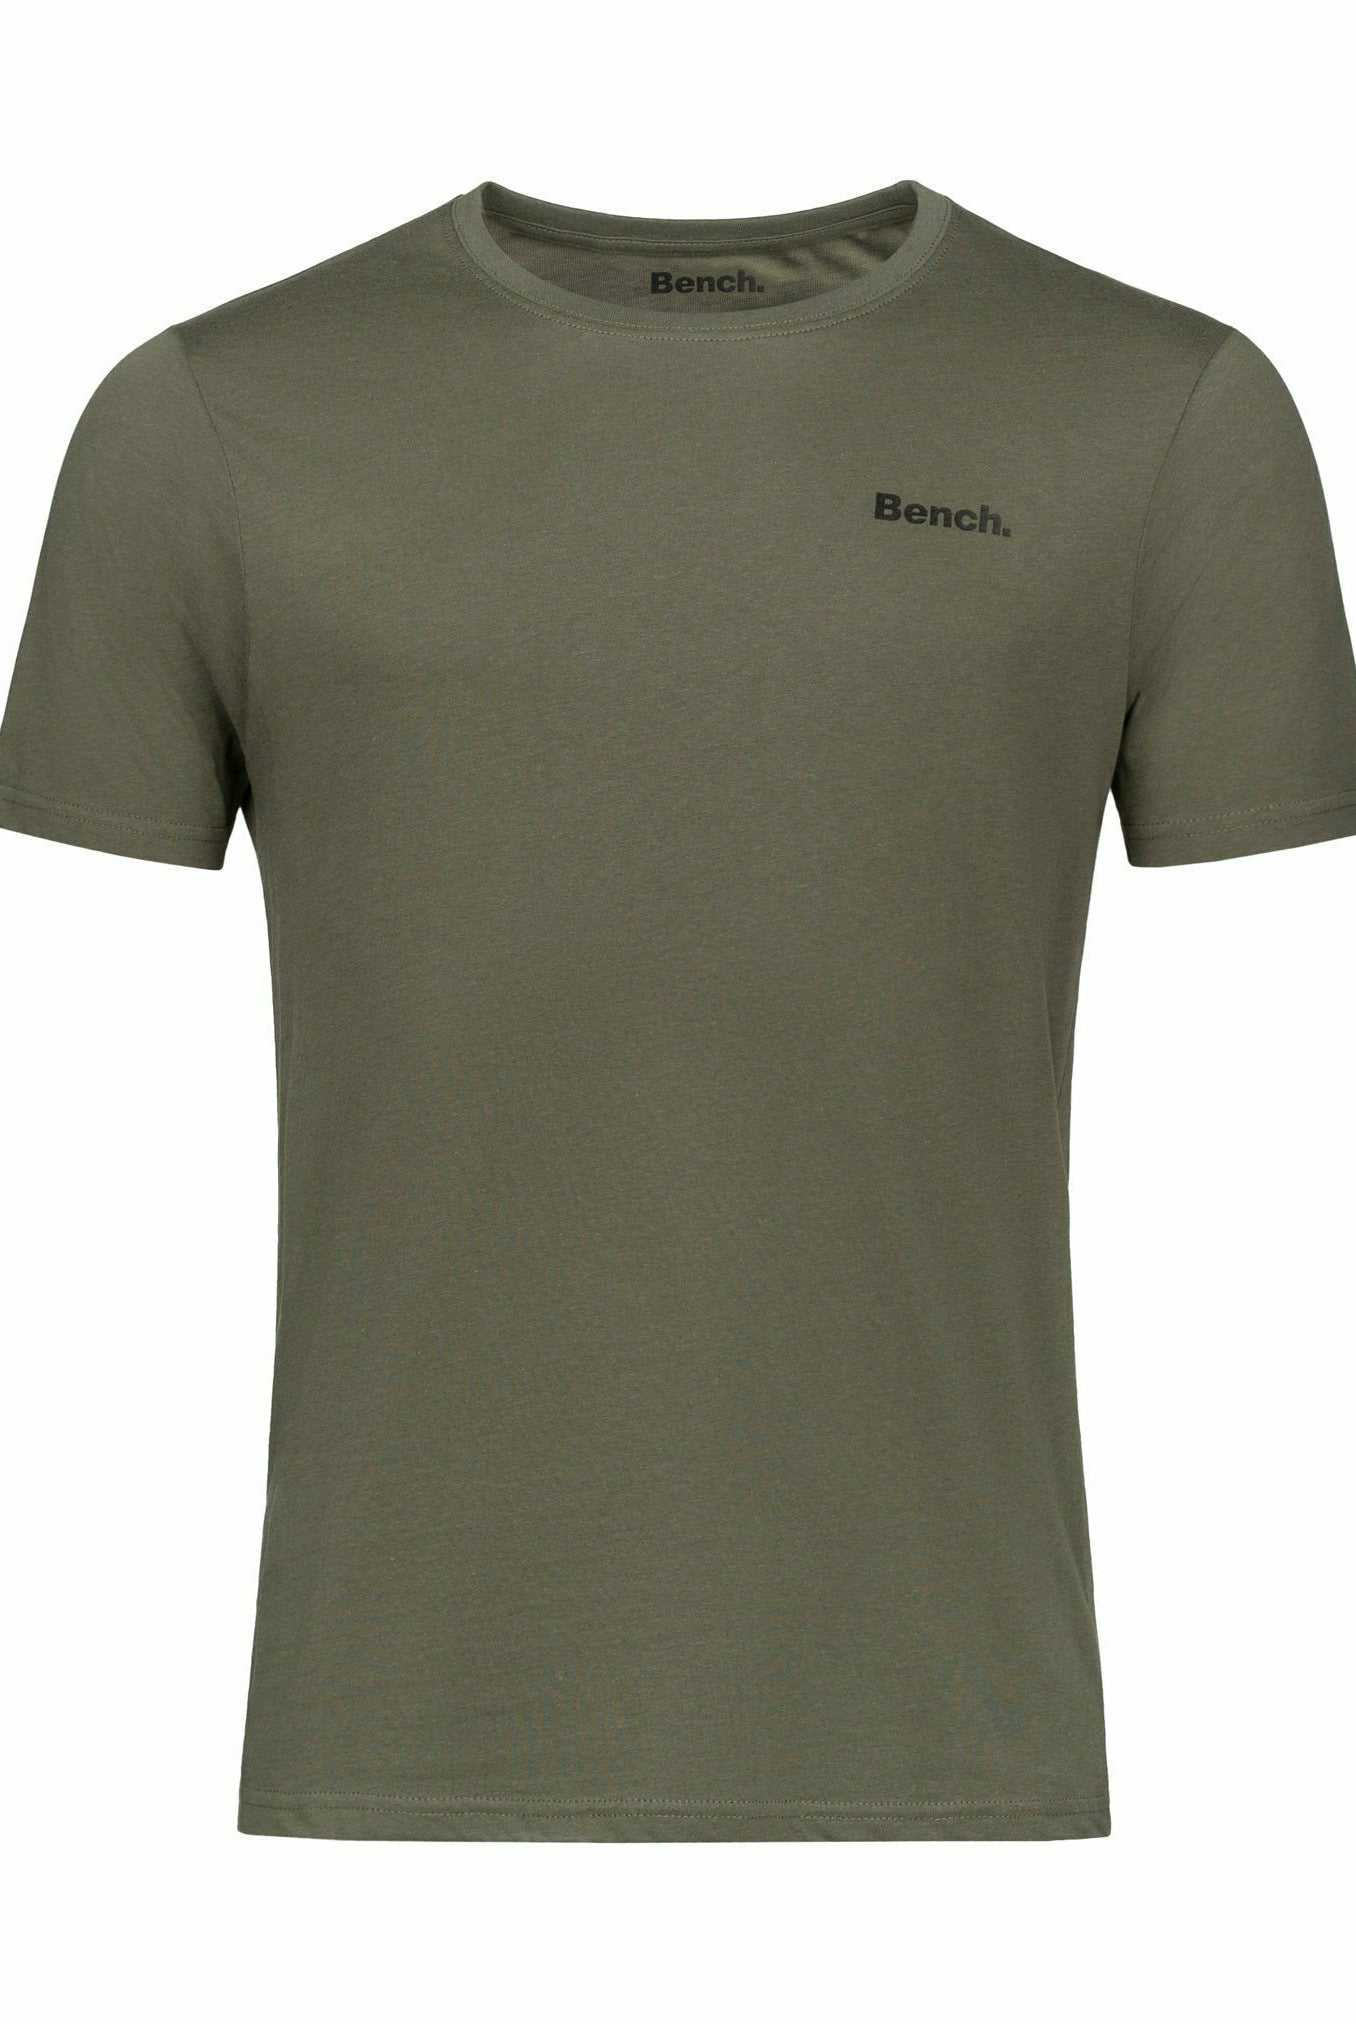 Mens 'OLIVER' T-Shirt 5 Pack - CORE ESSENTIAL PACK - Shop at www.Bench.co.uk #LoveMyHood